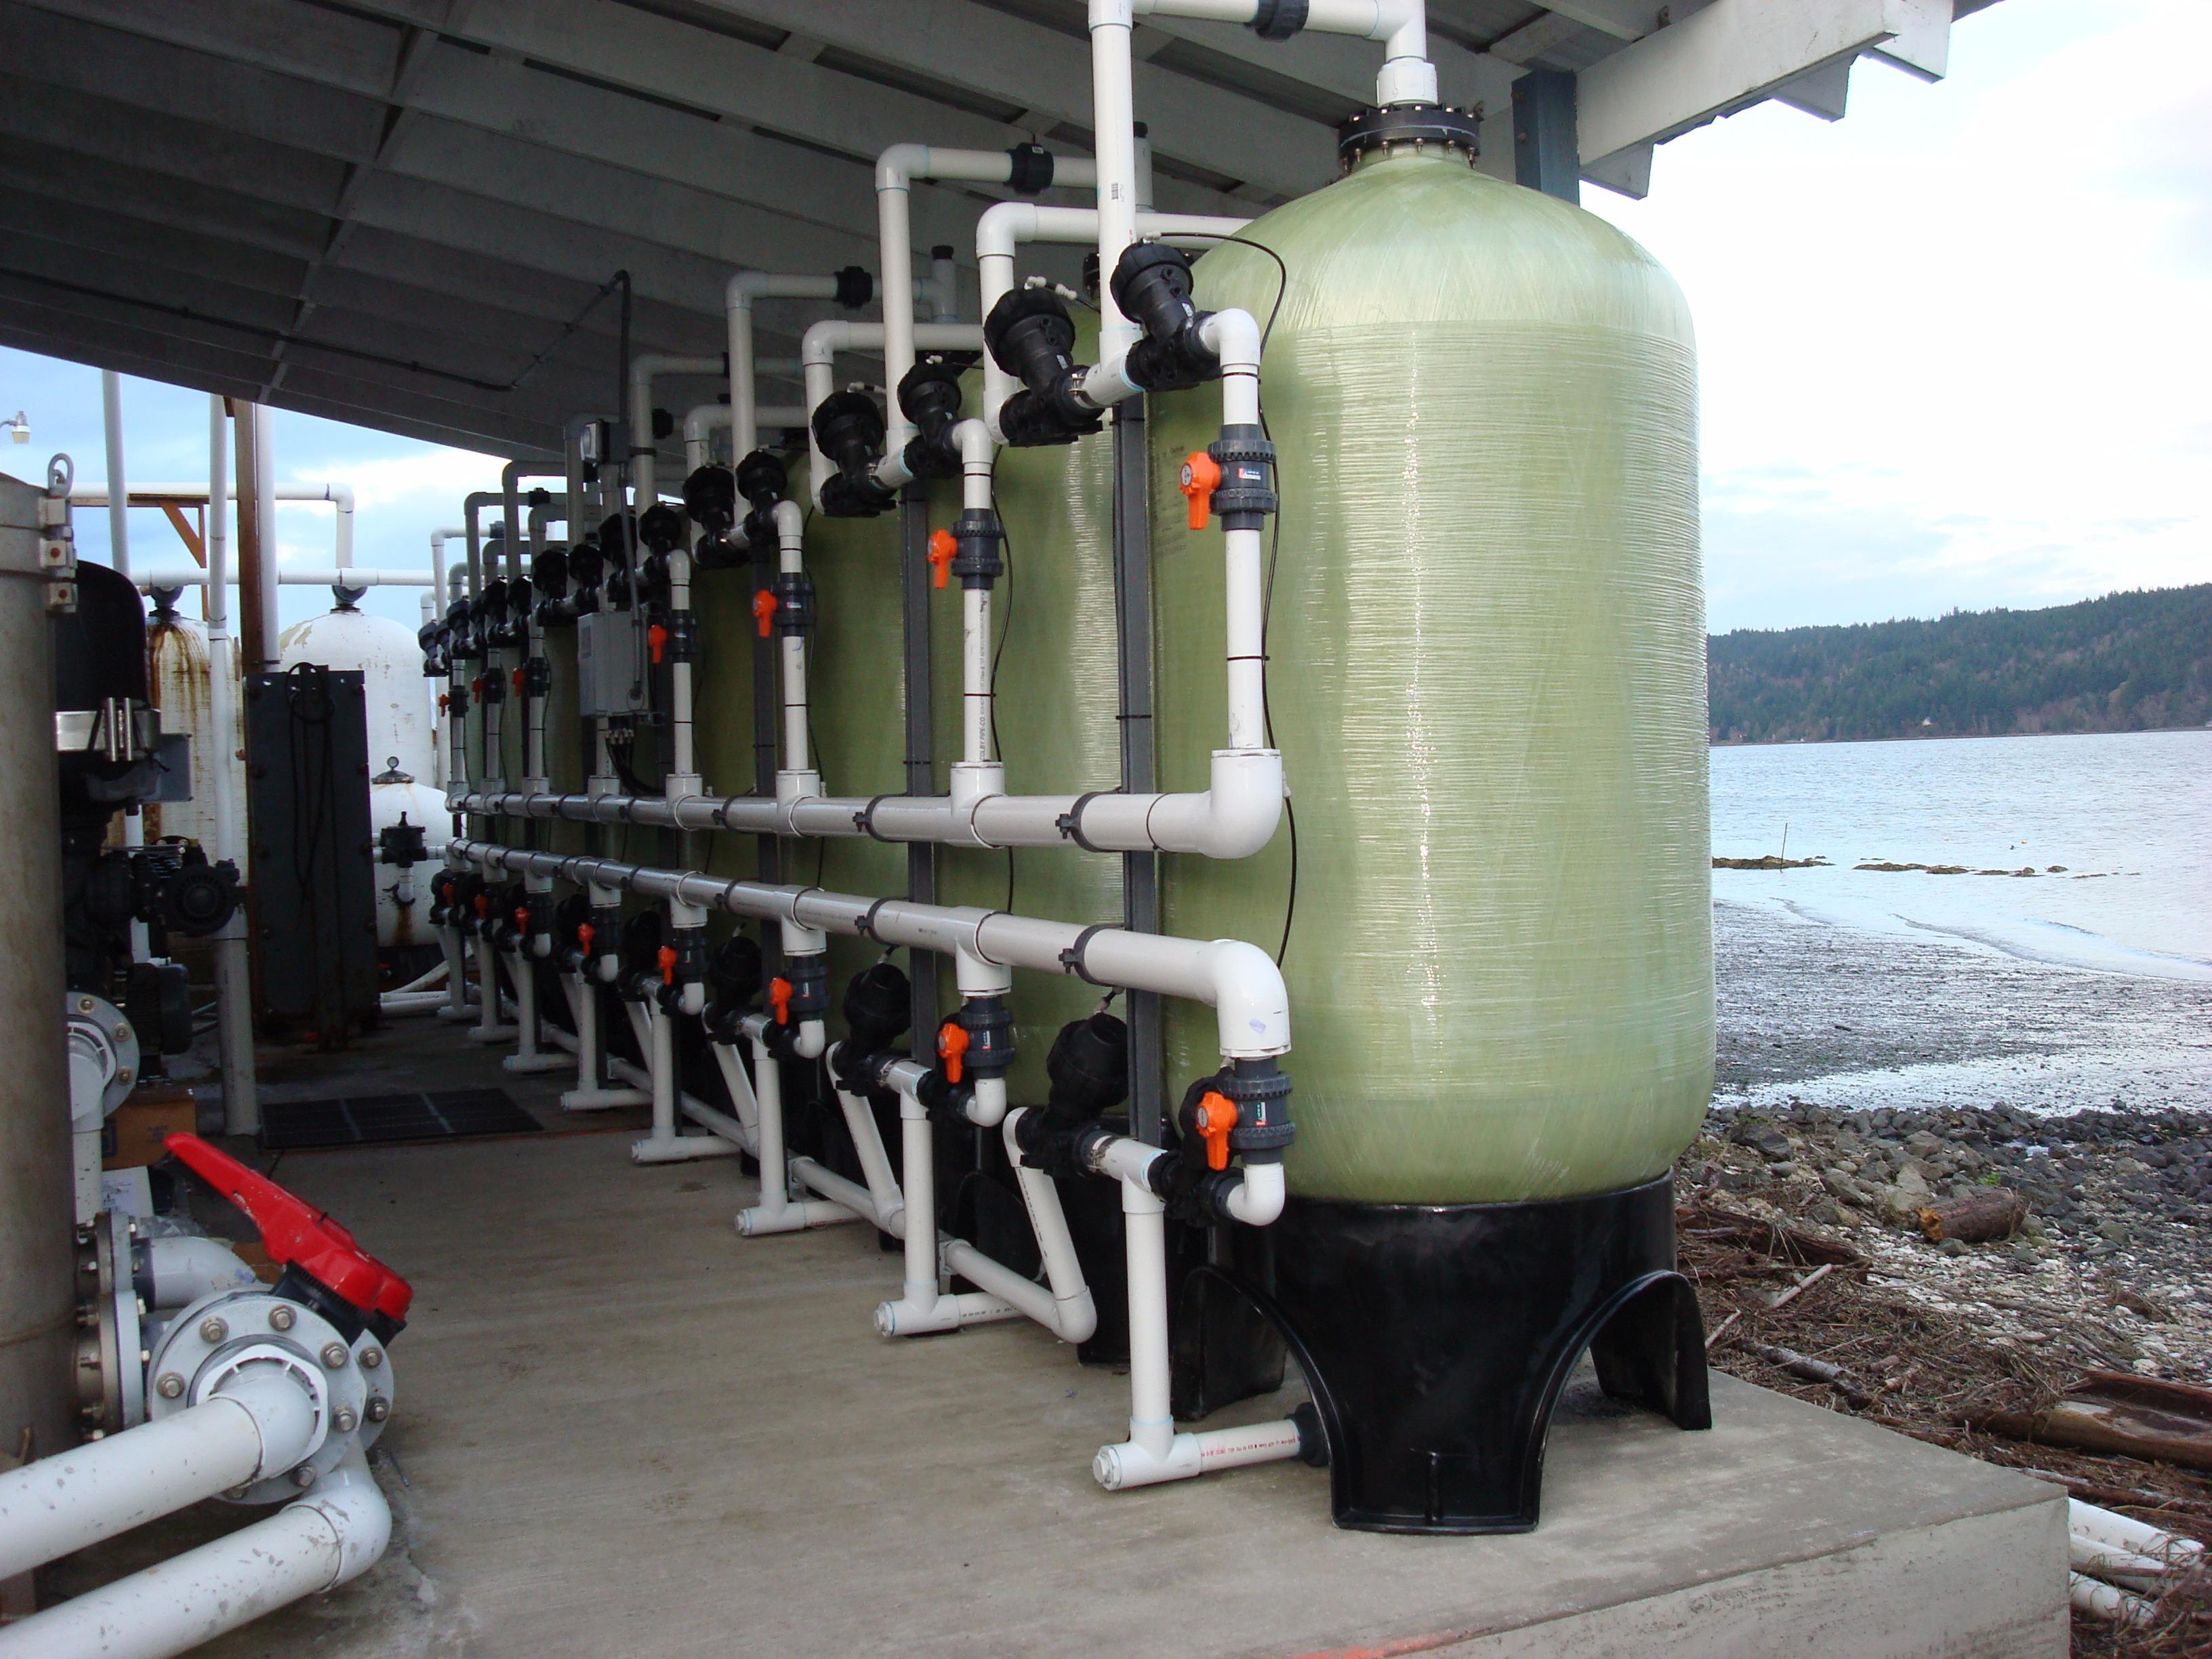 Water treatment system for acquaculture at a local seafood company.